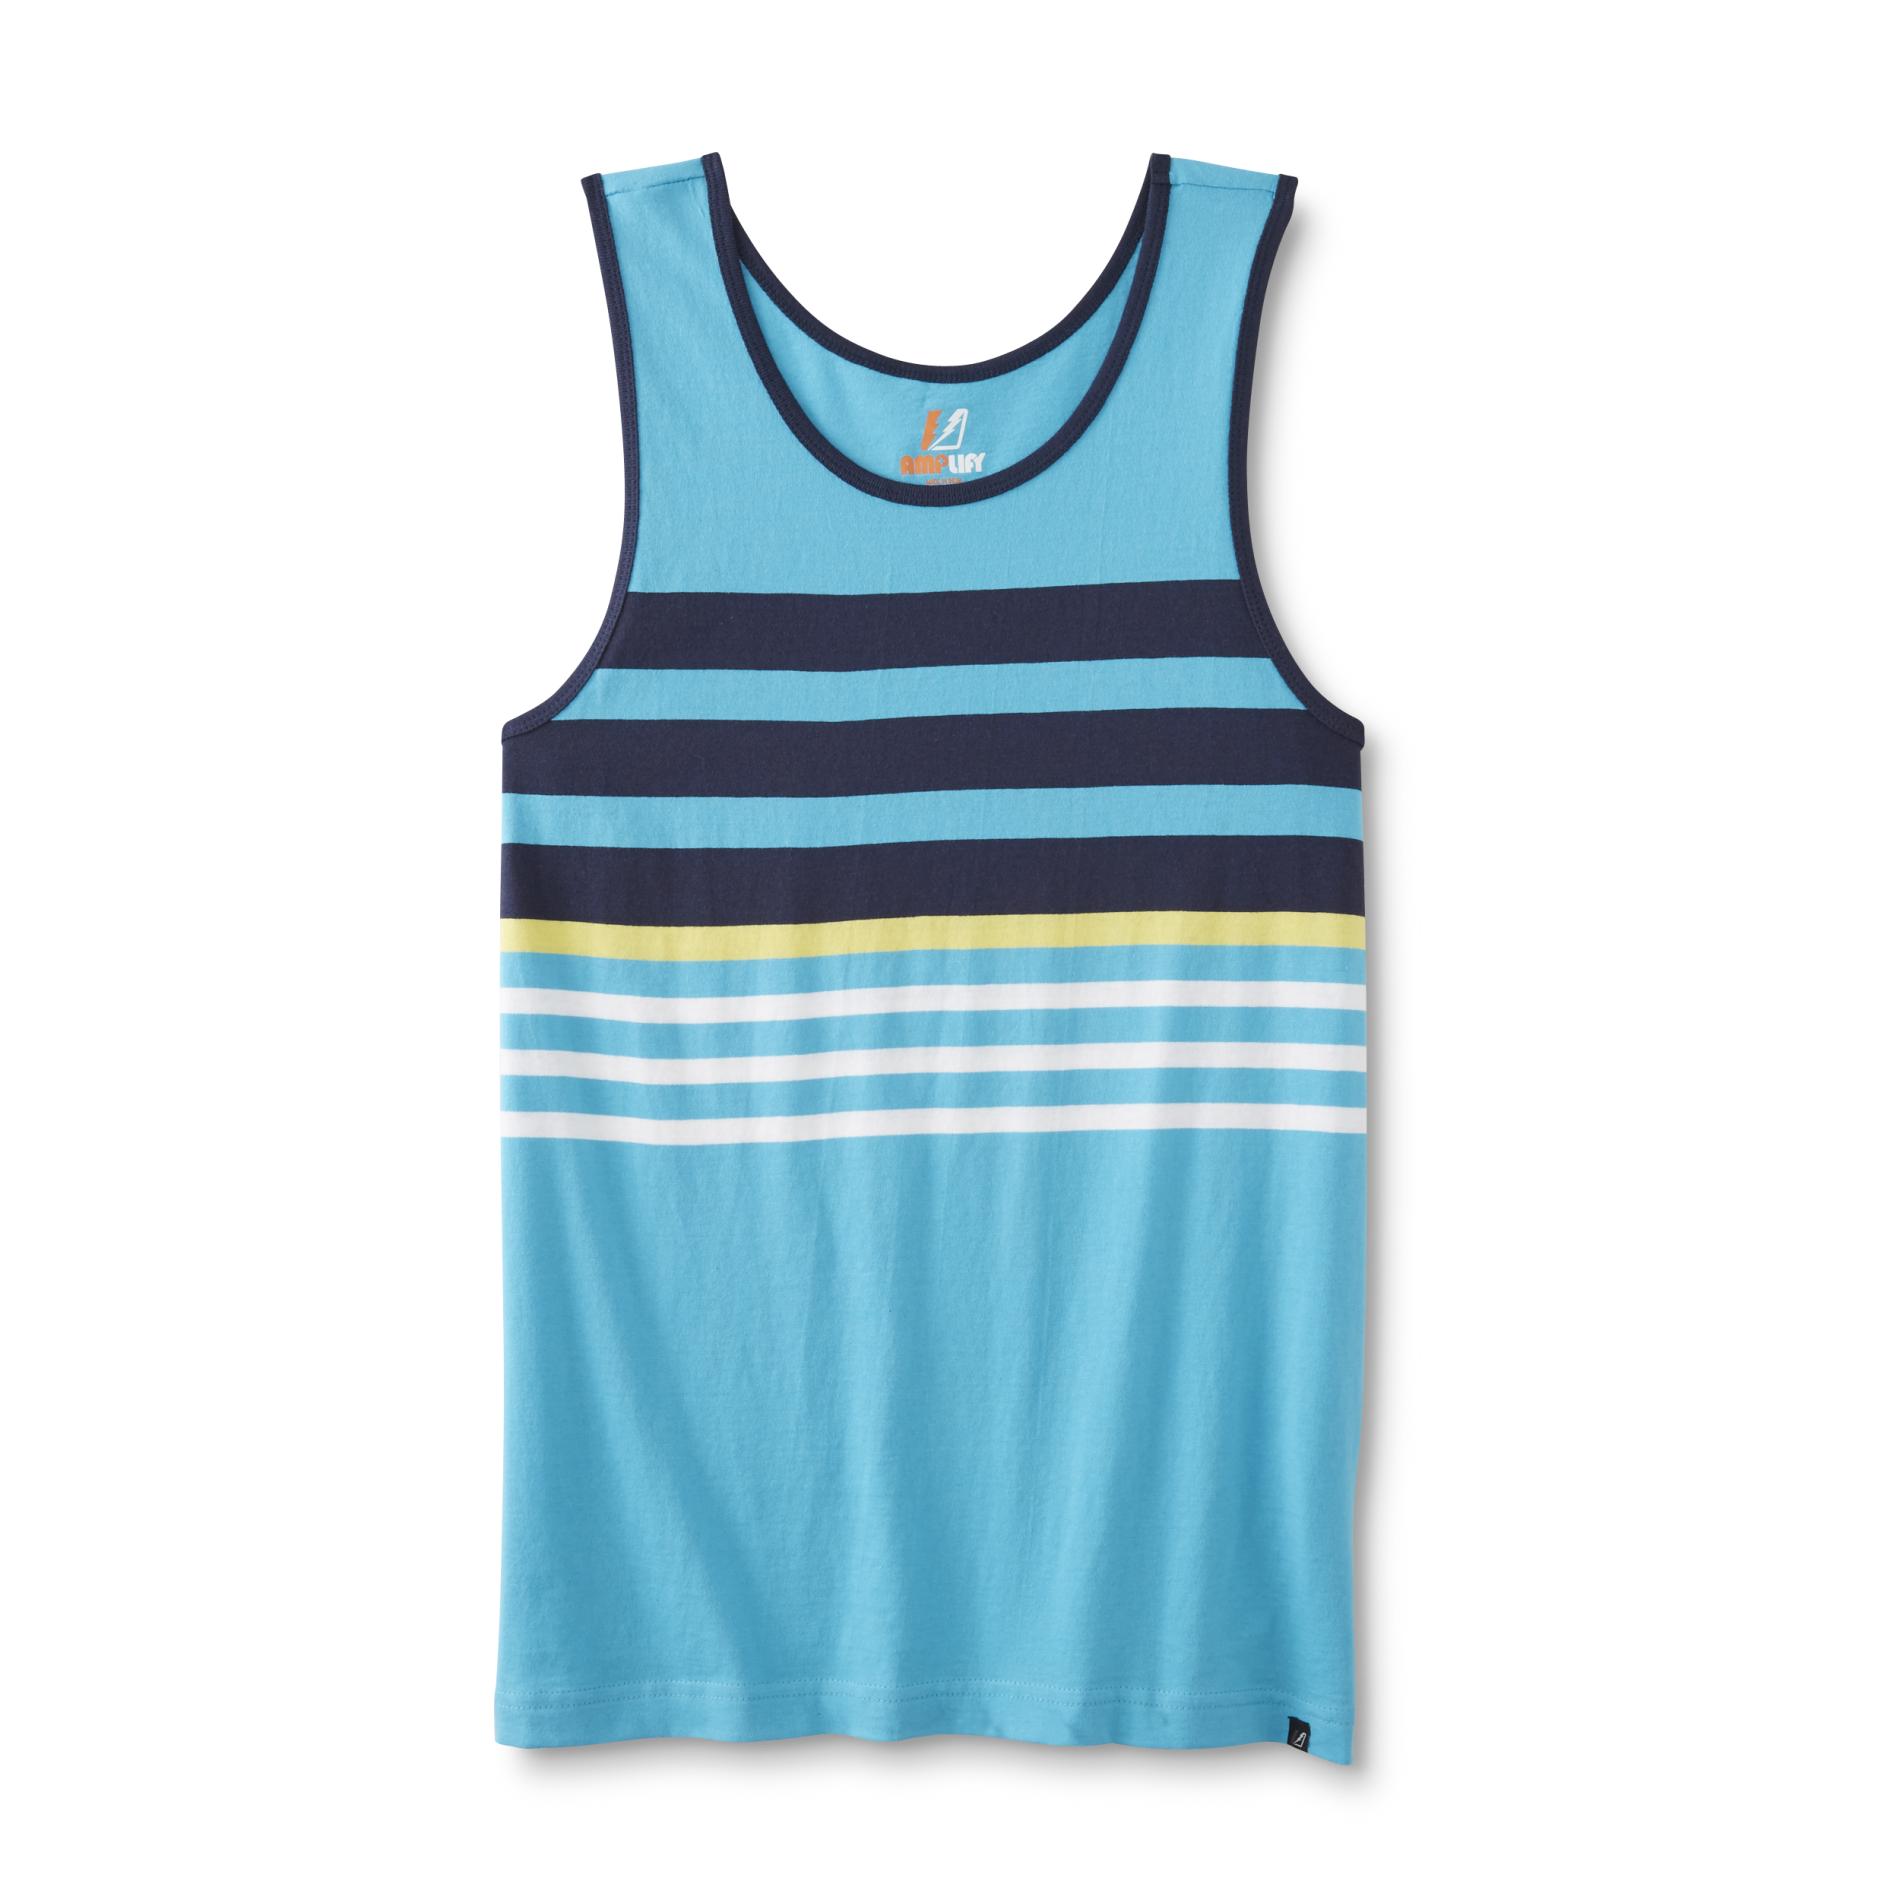 Amplify Young Men's Muscle Shirt - Striped